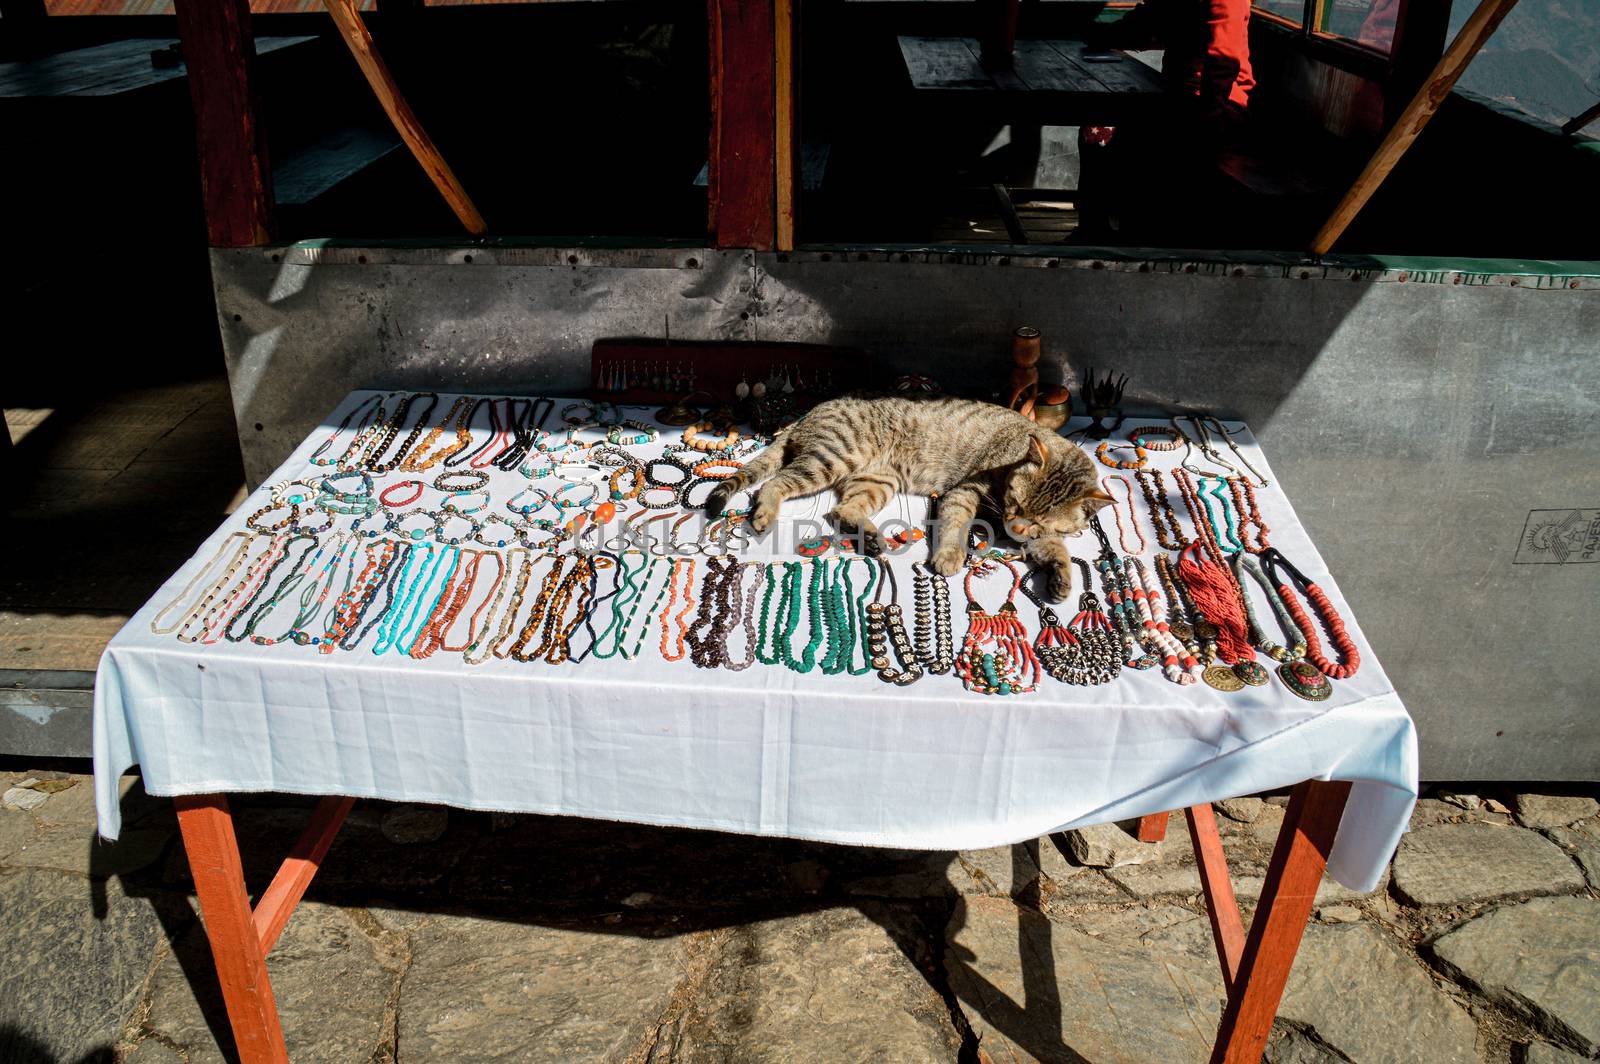 A cat sleeping on a table full of souvenirs for tourist by Sonnet15